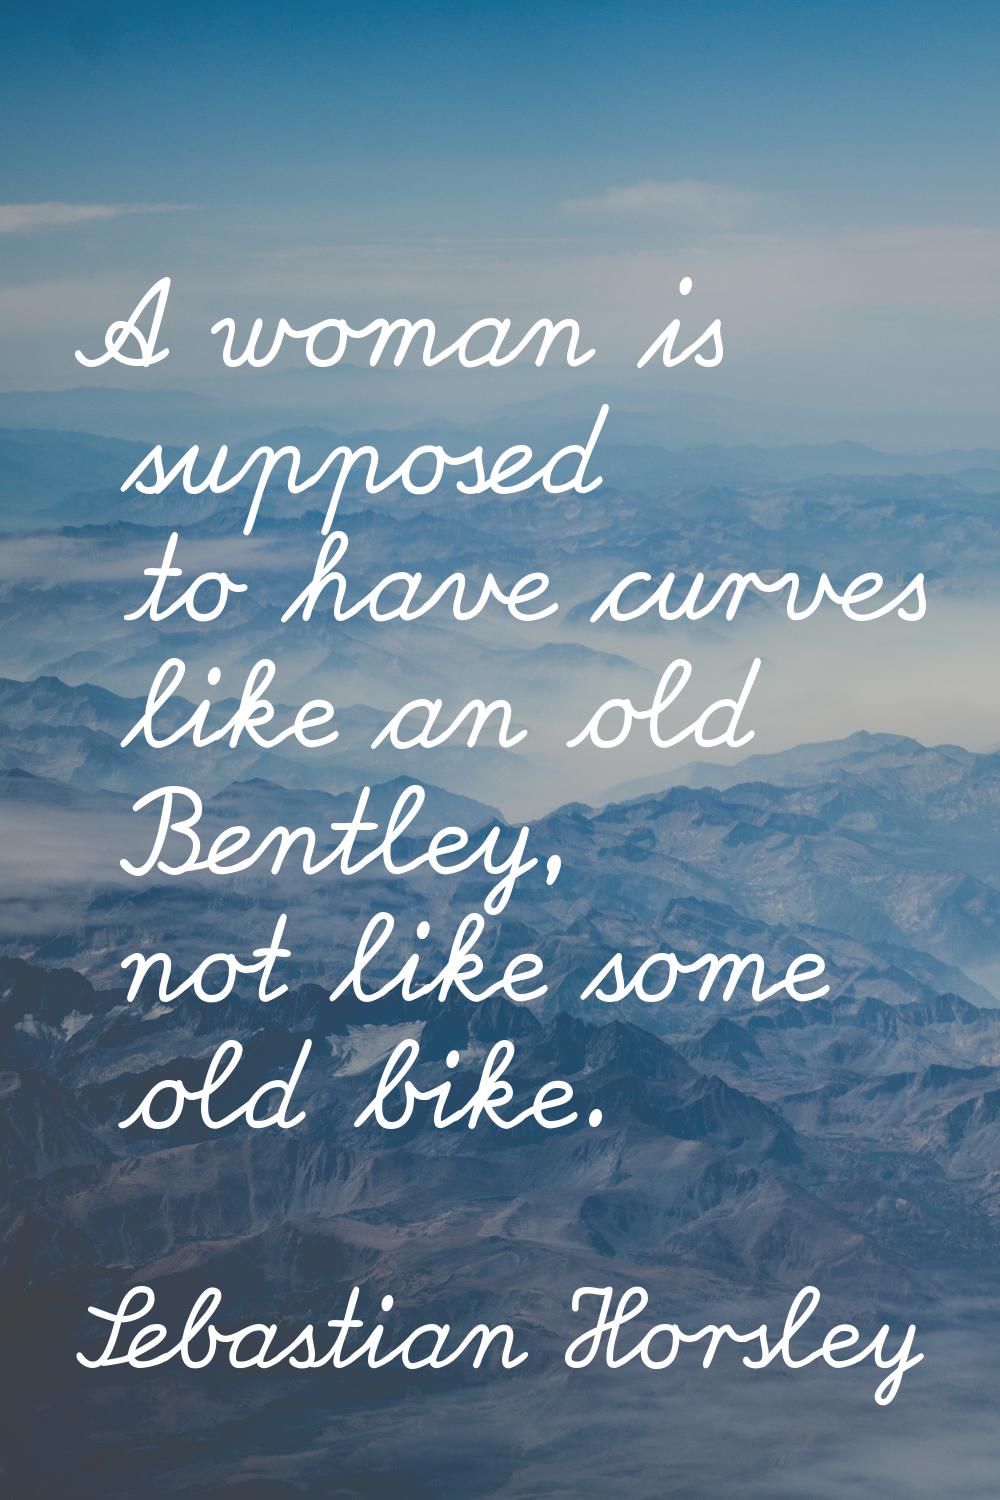 A woman is supposed to have curves like an old Bentley, not like some old bike.